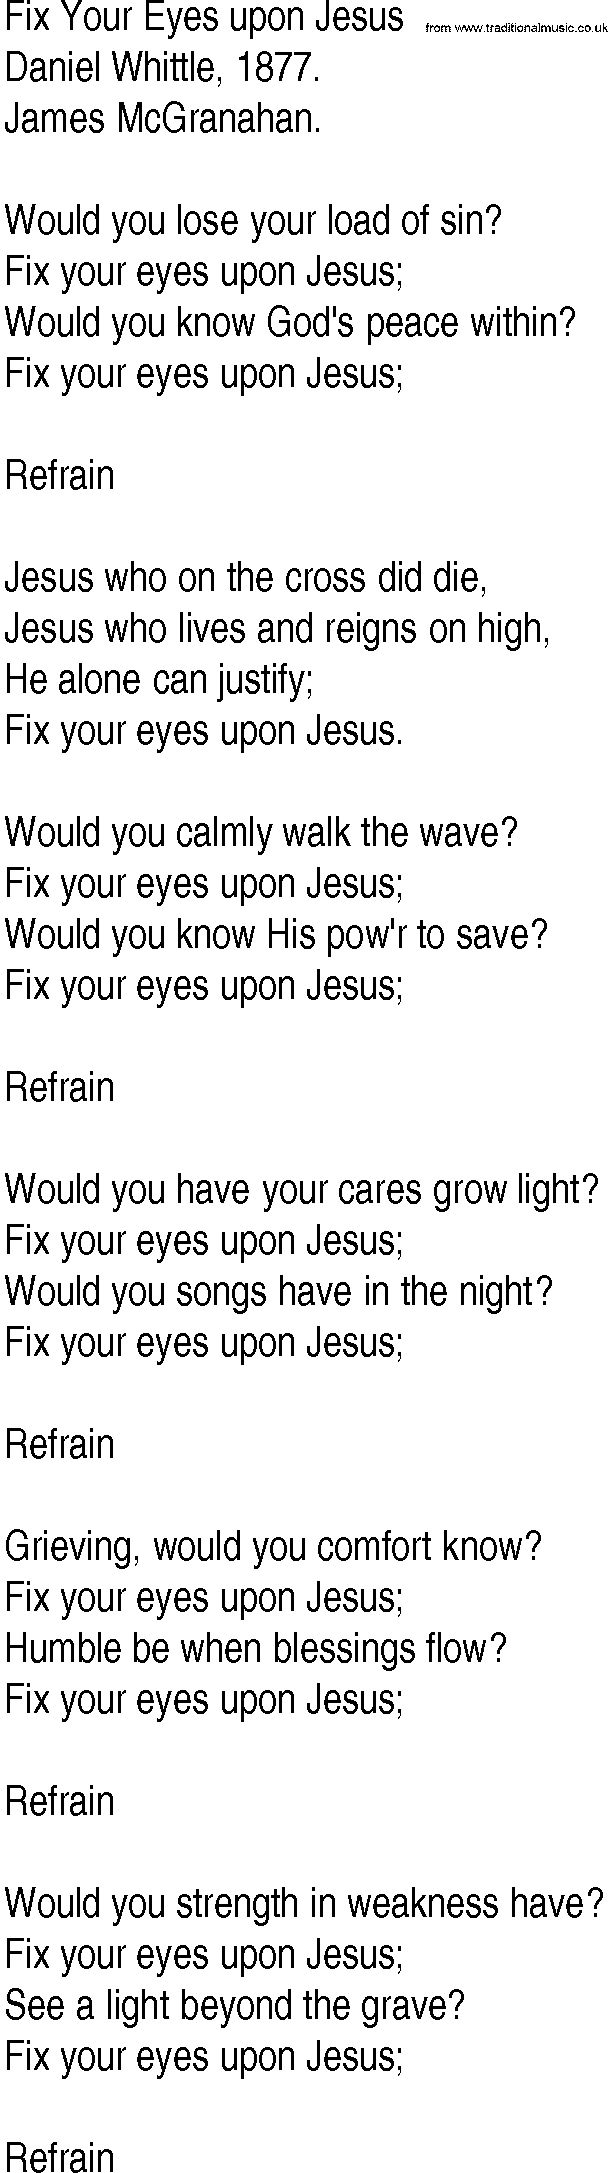 Hymn and Gospel Song: Fix Your Eyes upon Jesus by Daniel Whittle lyrics